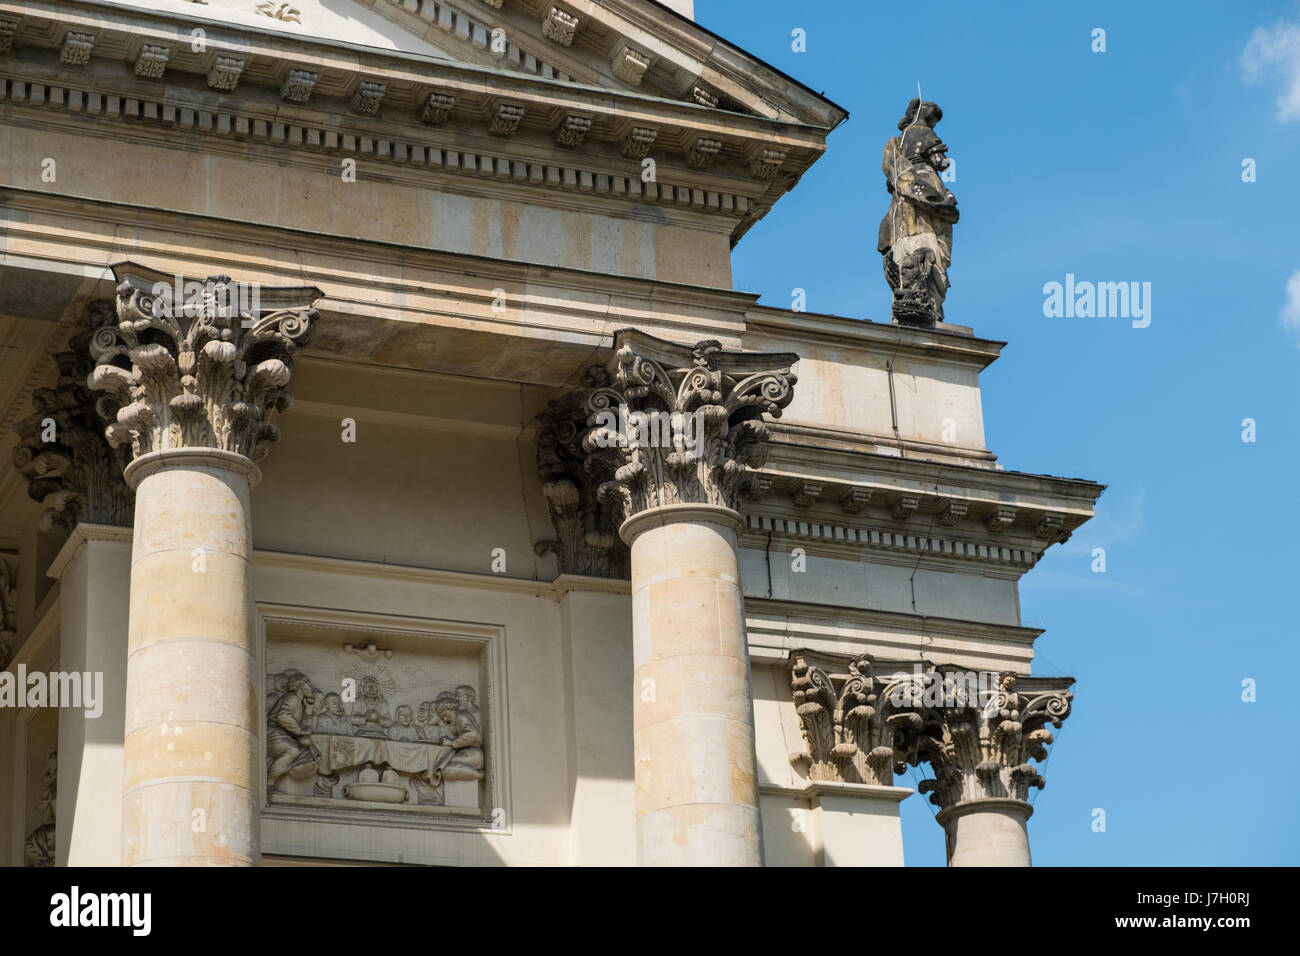 Berlin, Germany - may 23, 2017:  Historic facade detail of the pillars / capitals of the columns of the French Dome at Gendarmenmarkt in Berlin. Stock Photo